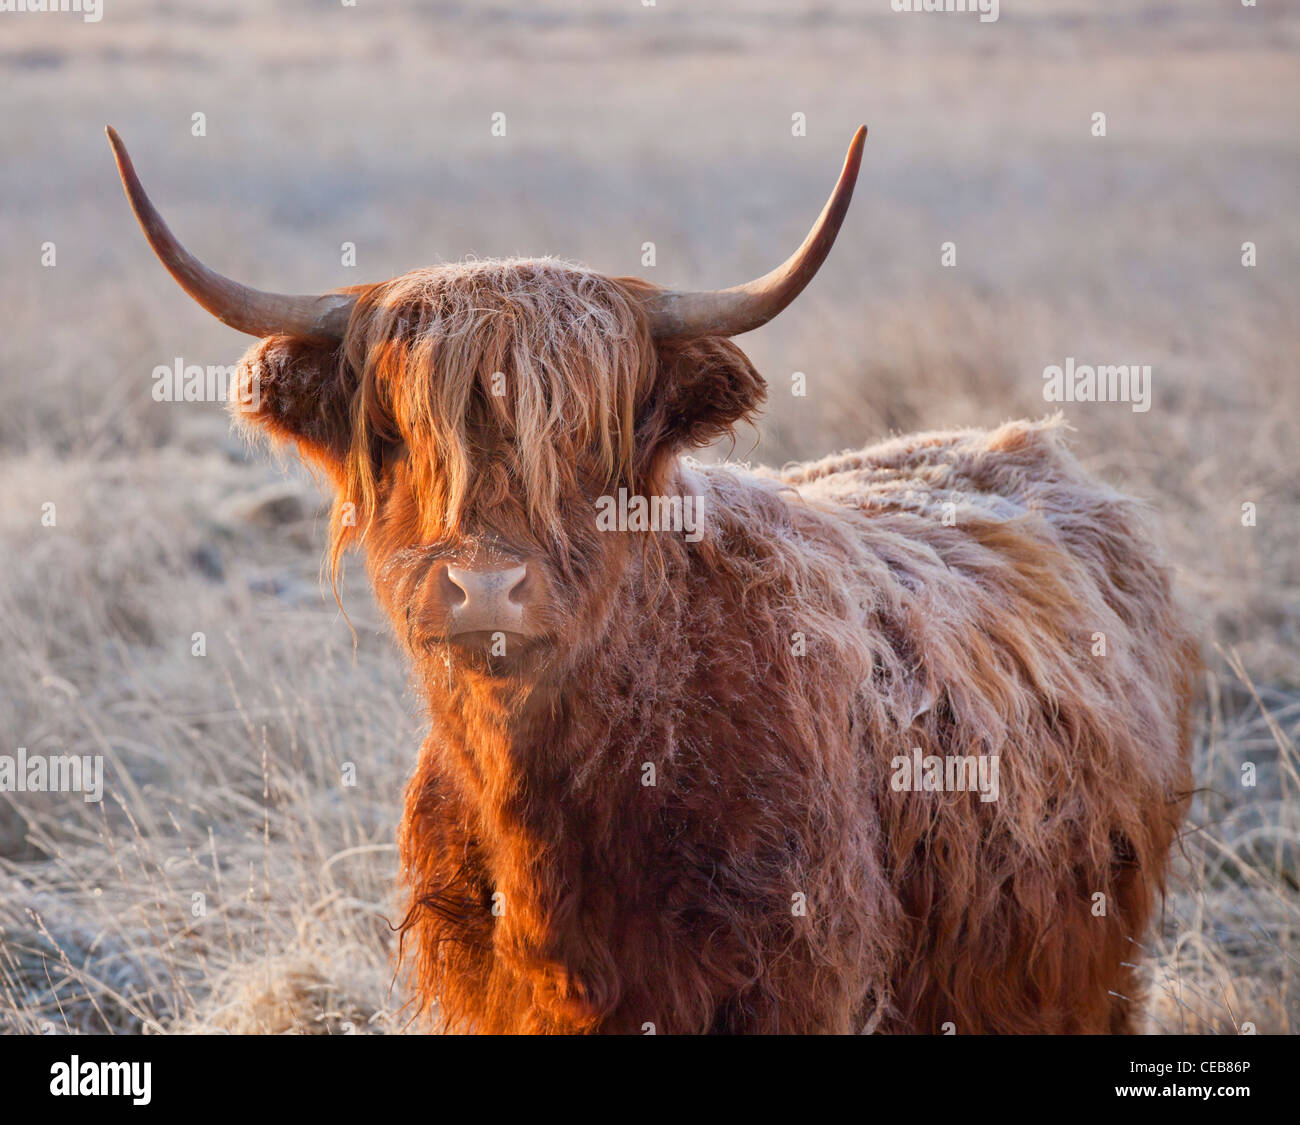 Highland cow in the cold frosty winter weather with frost on its coat back Stock Photo